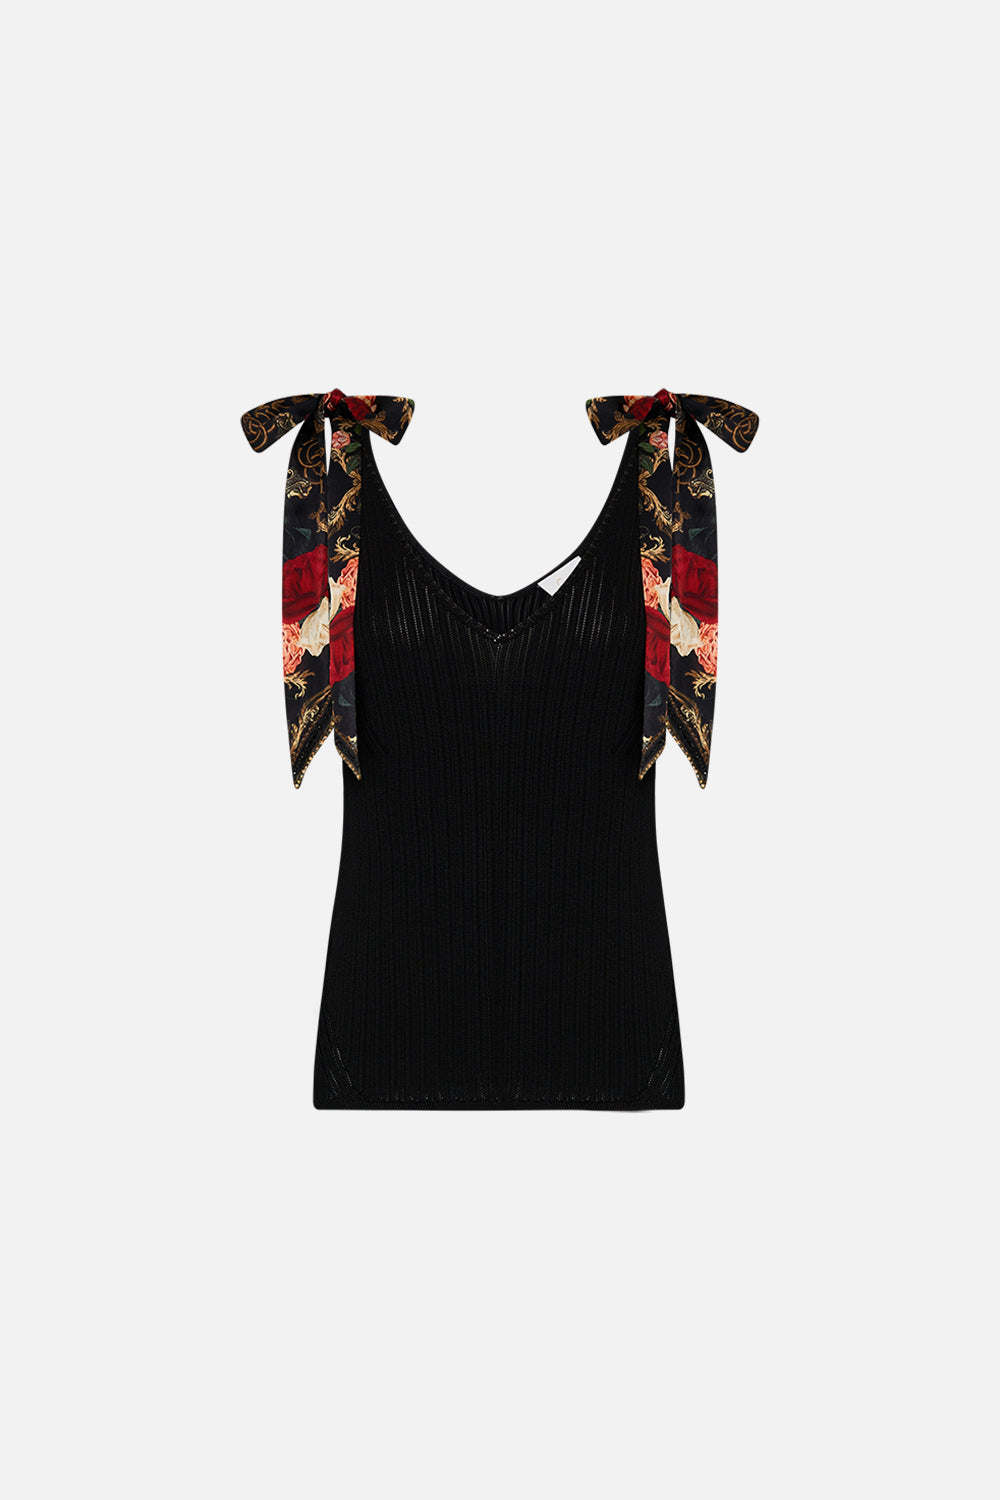 CAMILLA black top with silk bow details in Magic In The Manuscripts print